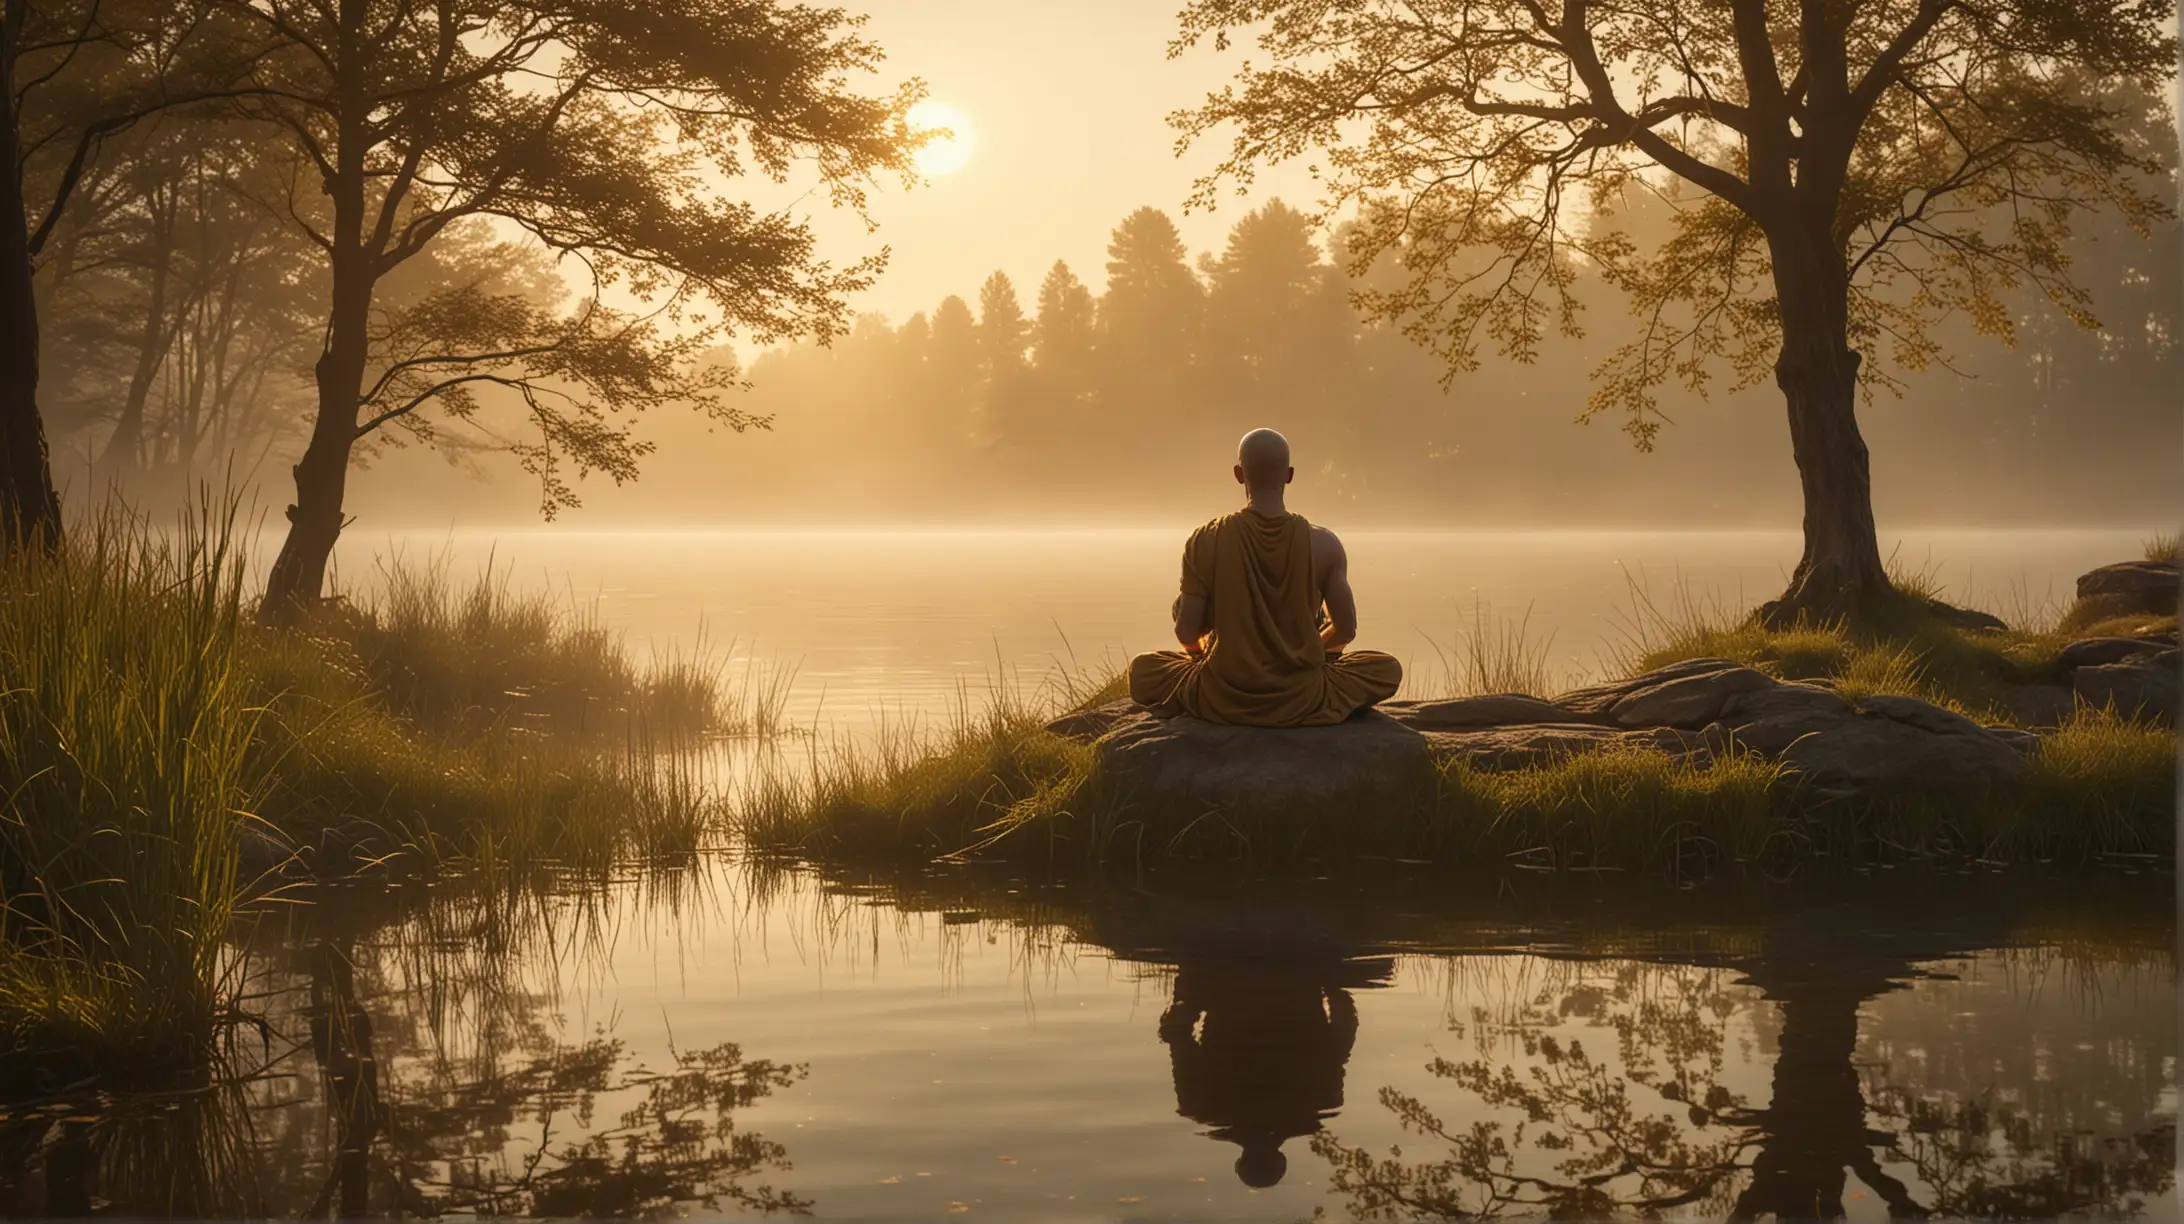 Stoic Philosopher Meditating by Serene Lakeside at Dawn